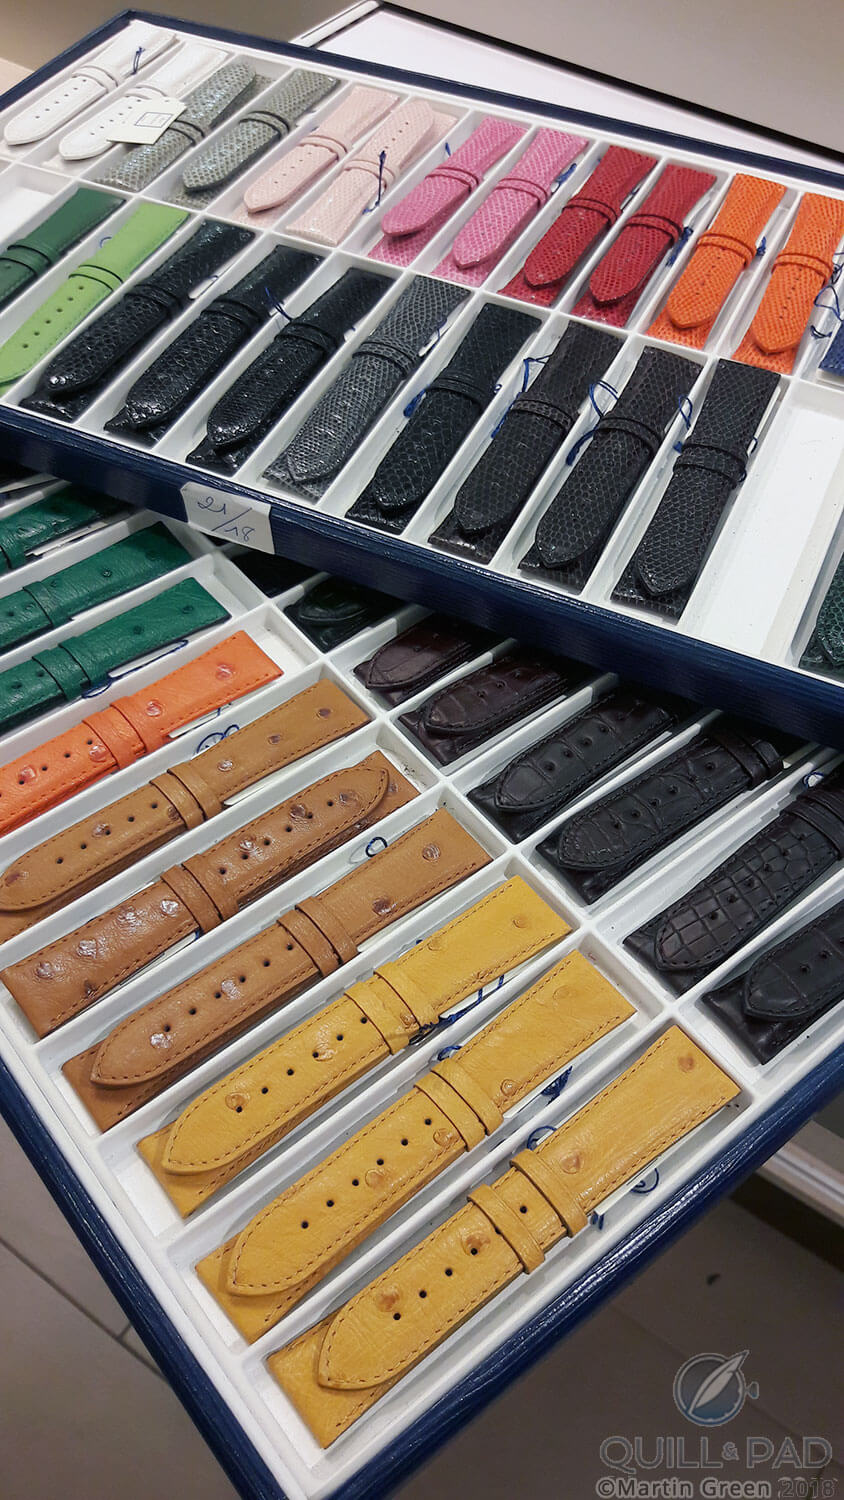 Colorful watch straps at Jean Rousseau, London